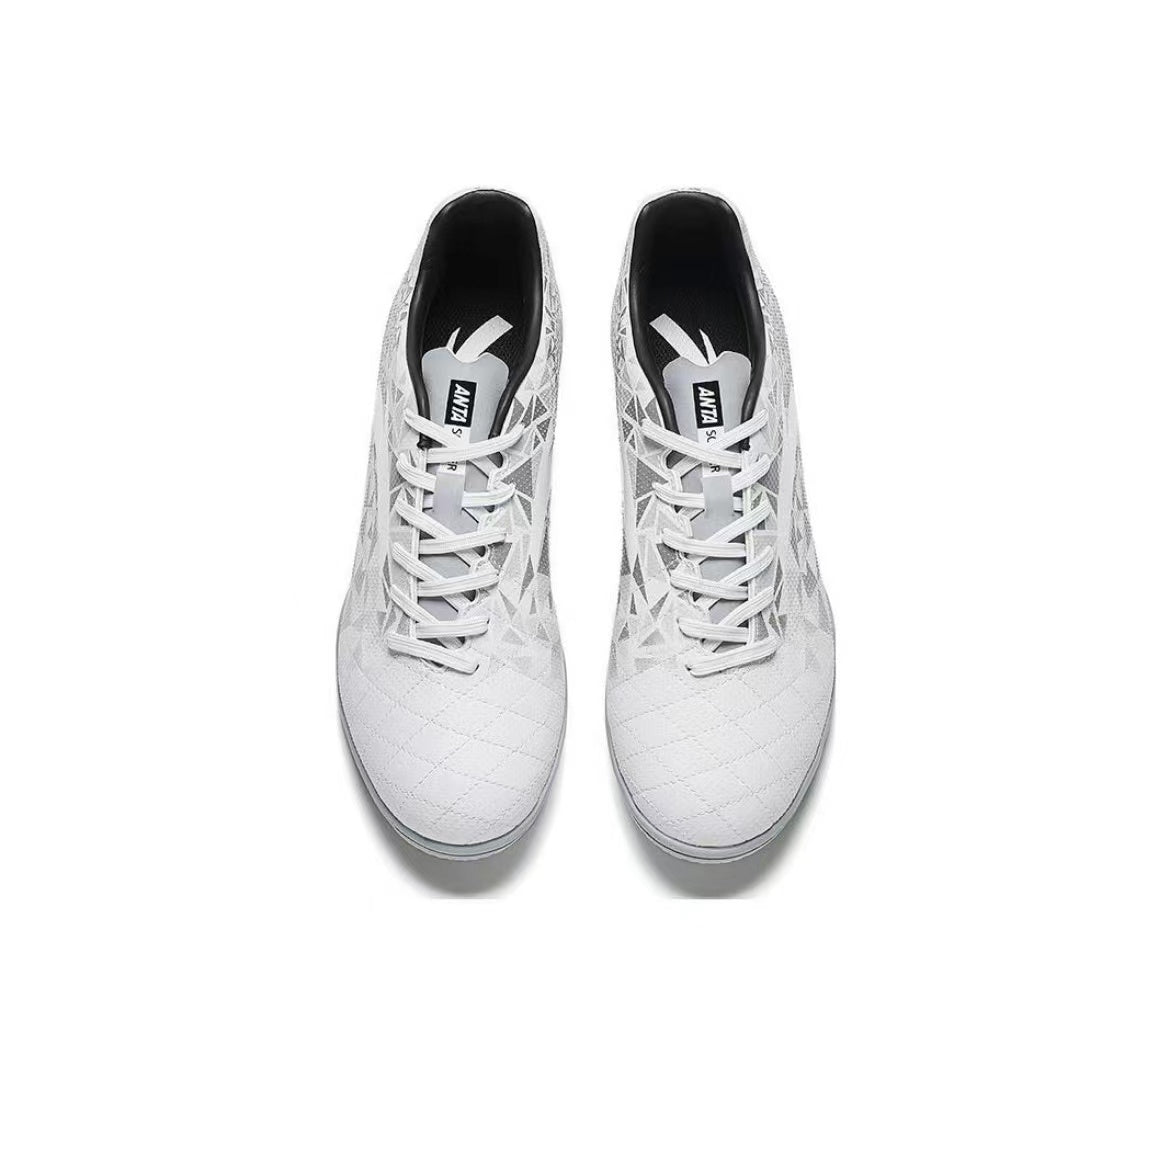 Anta Wear-Resistant Soccer Shoes - Gray/White